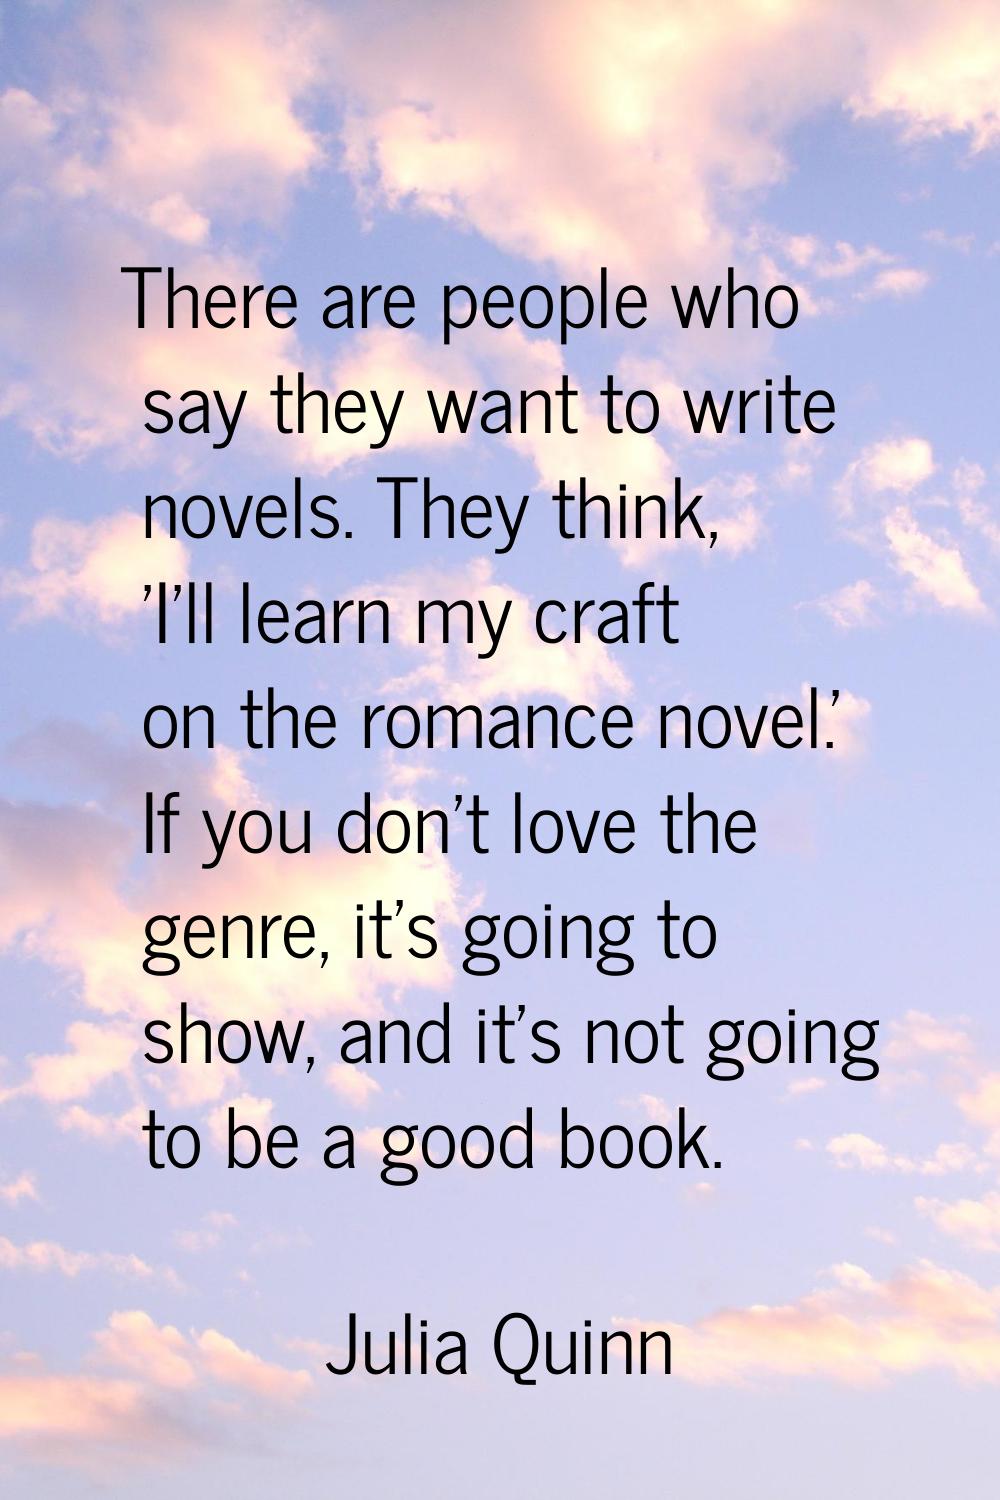 There are people who say they want to write novels. They think, 'I'll learn my craft on the romance